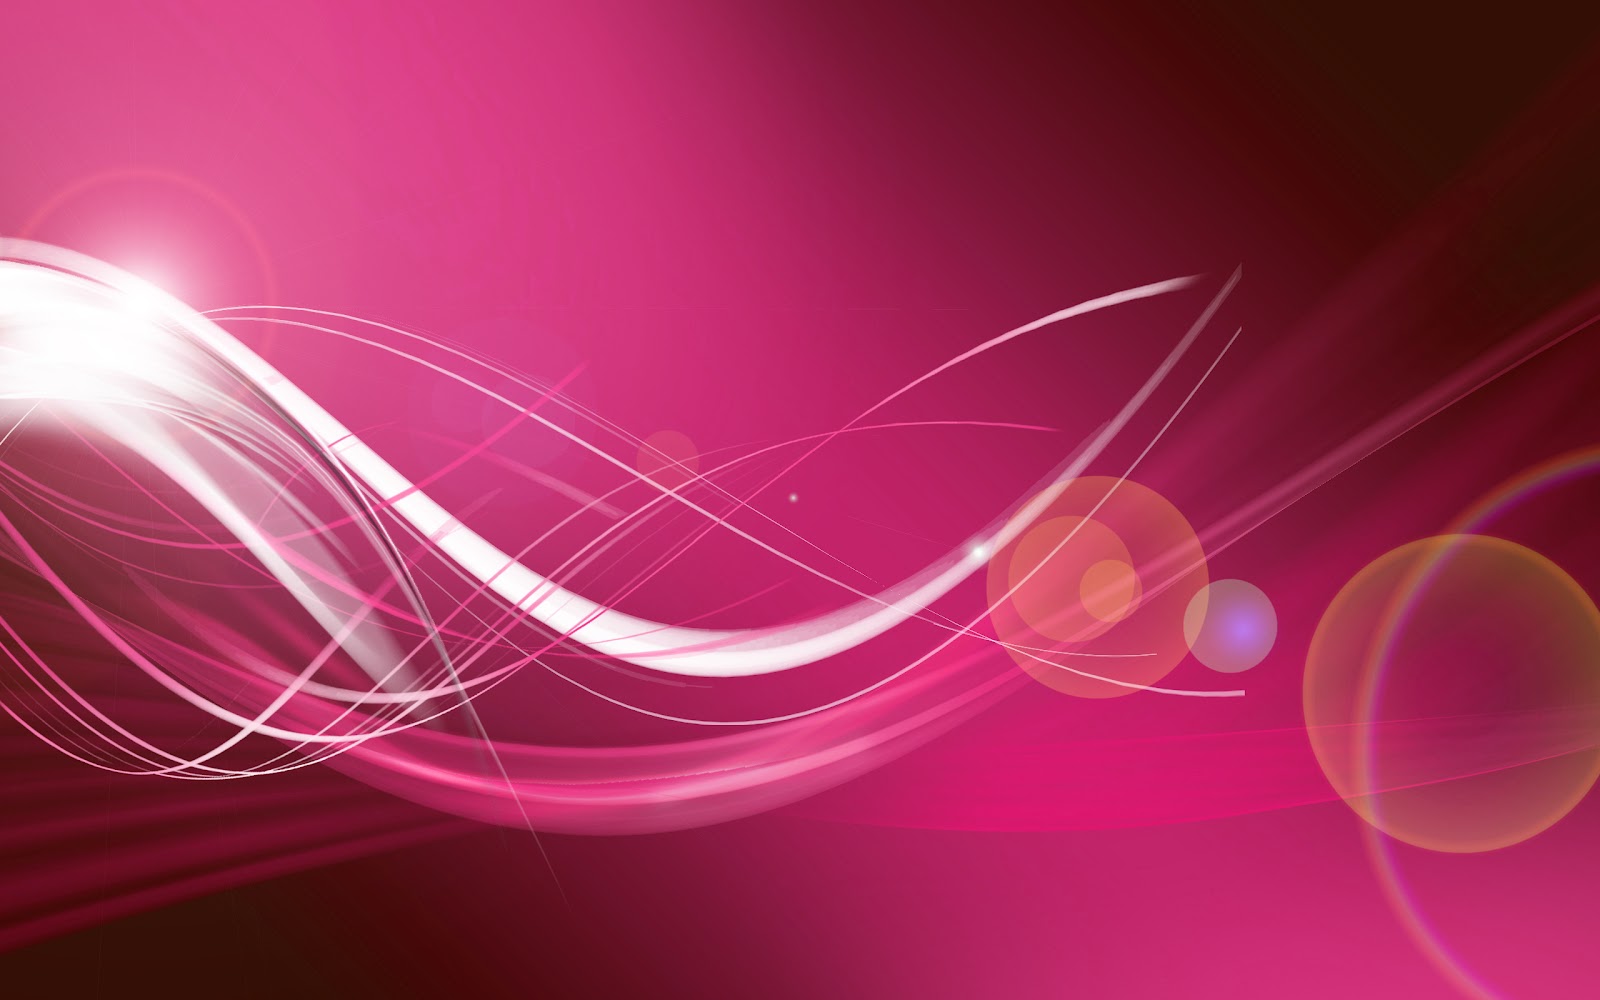 Abstrac Lines On Pink Background Wallpaper Home Of